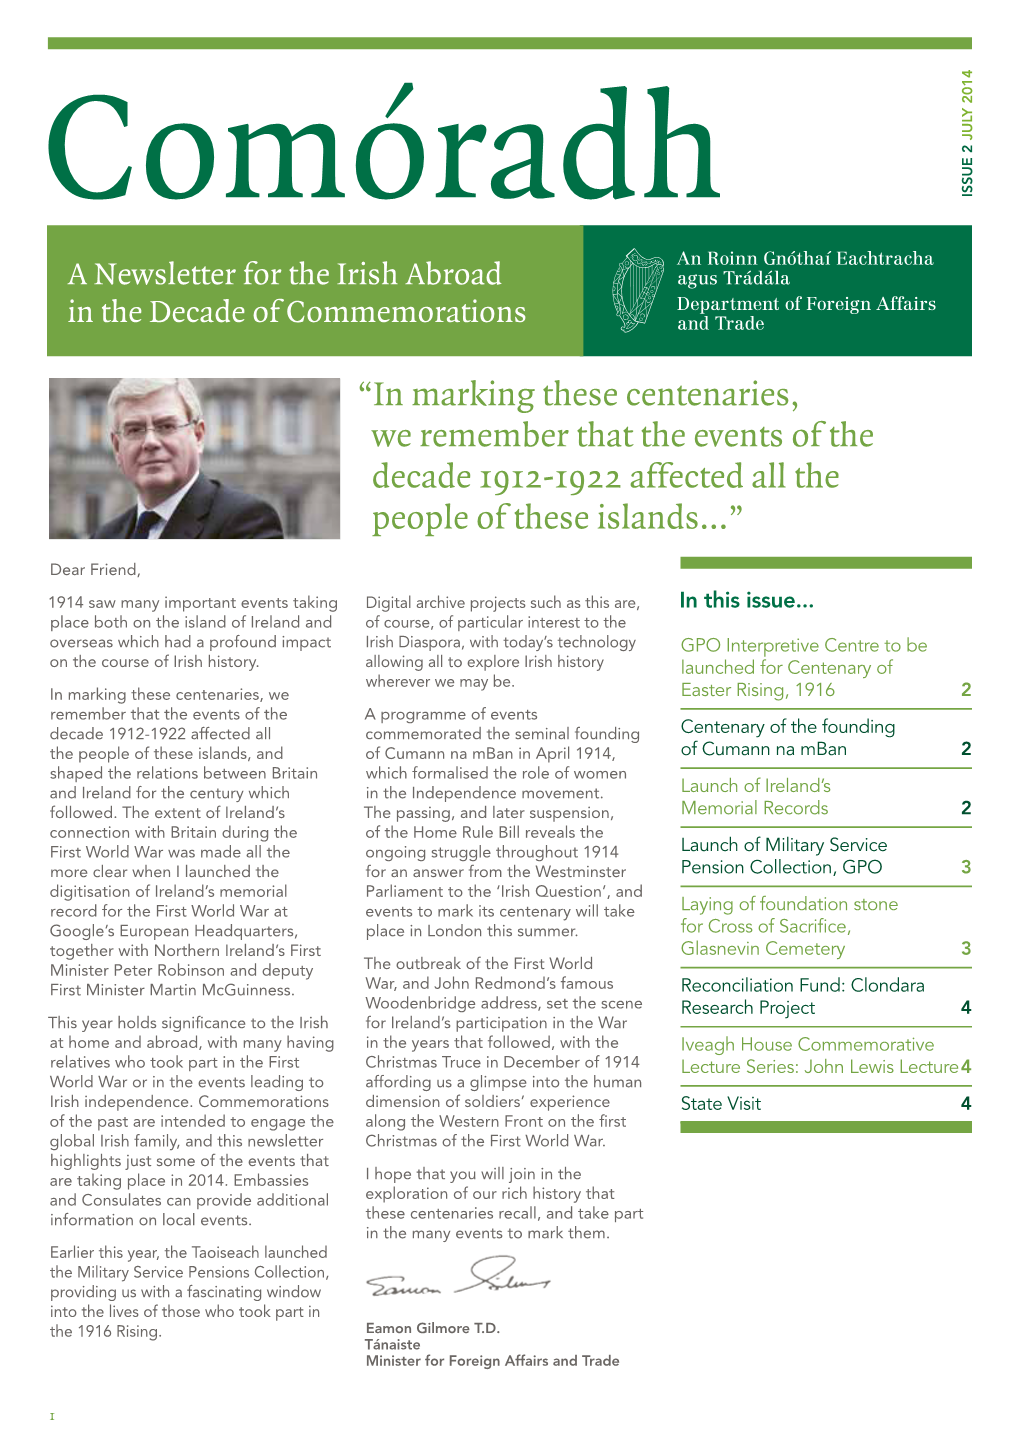 Comóradh 2014 ISSUE 2 JULY a Newsletter for the Irish Abroad in the Decade of Commemorations